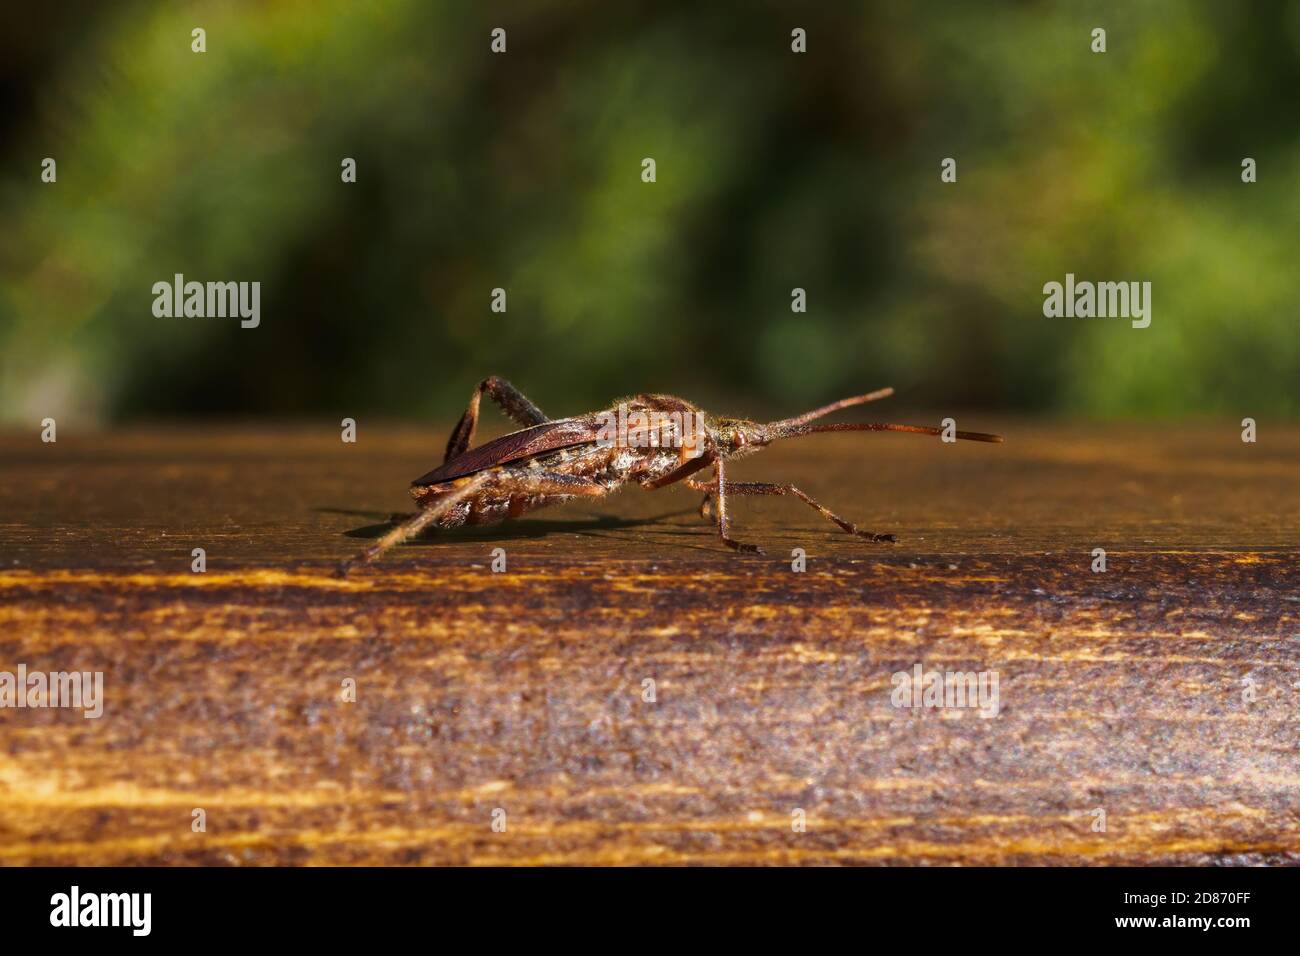 Western conifer seed bug, Leptoglossus occidentalis on wooden plank Stock Photo